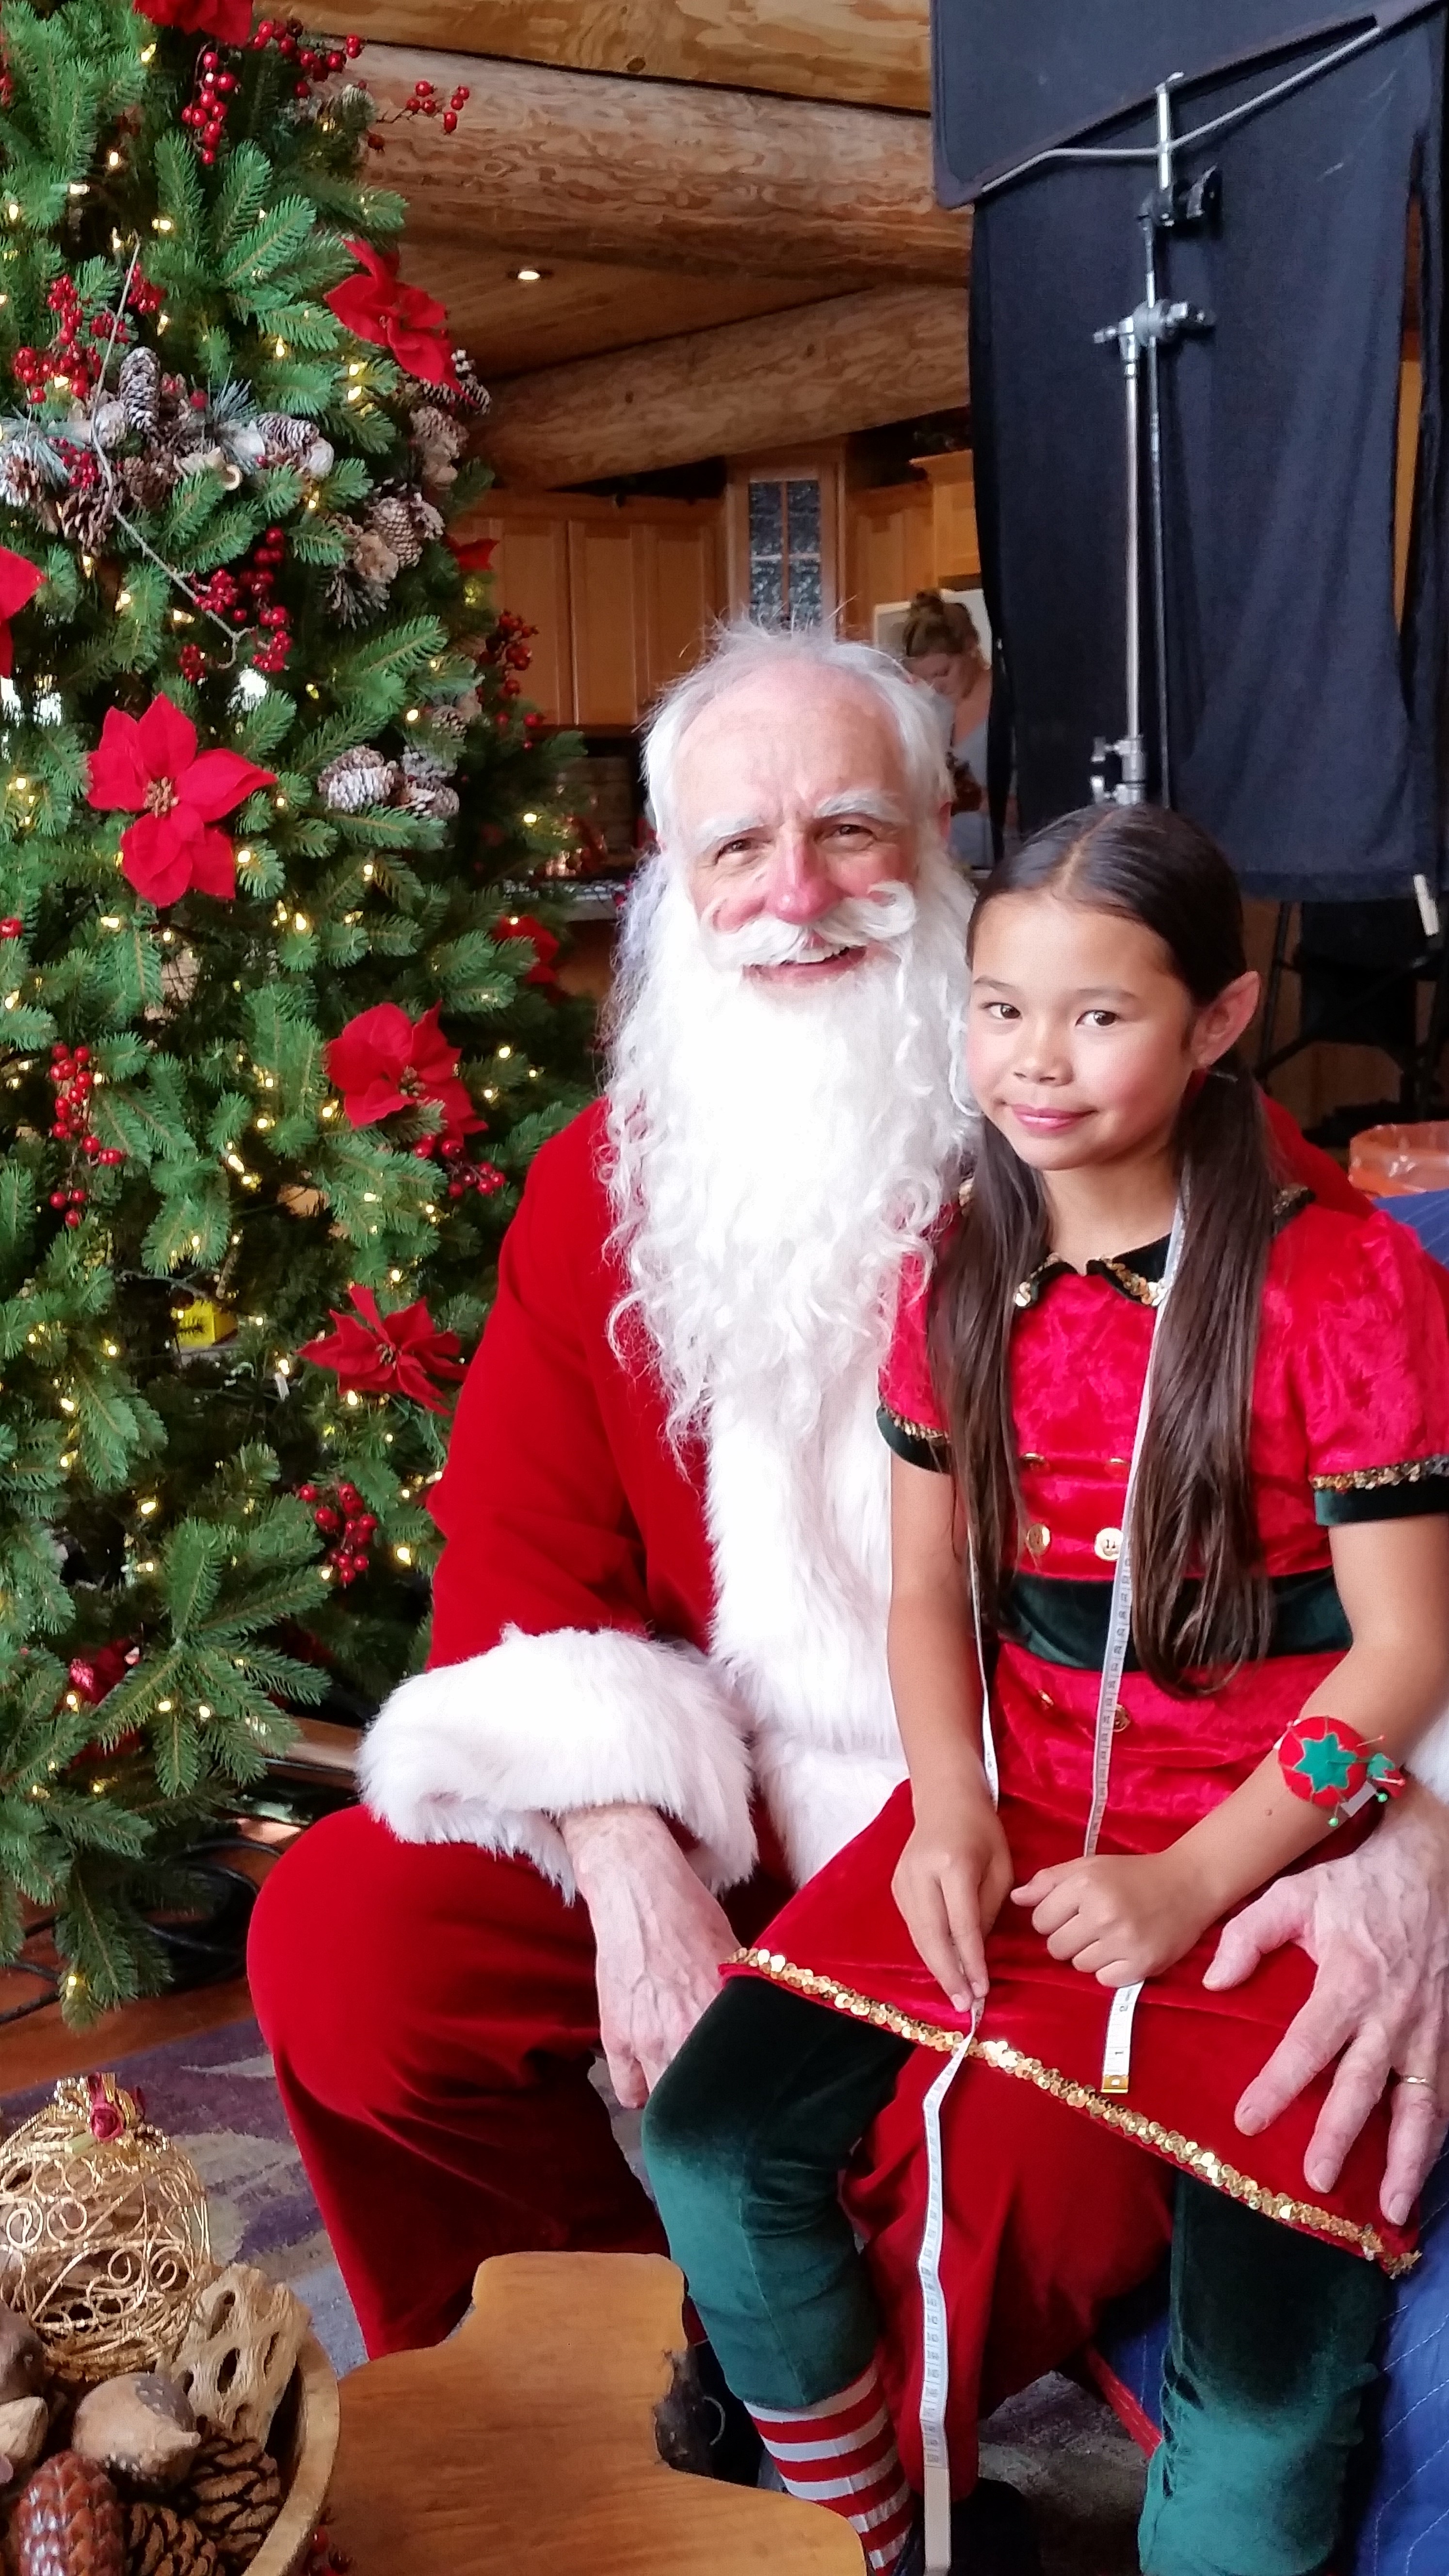 Onset of Becoming Santa, Emily Delahunty with Michael Gross